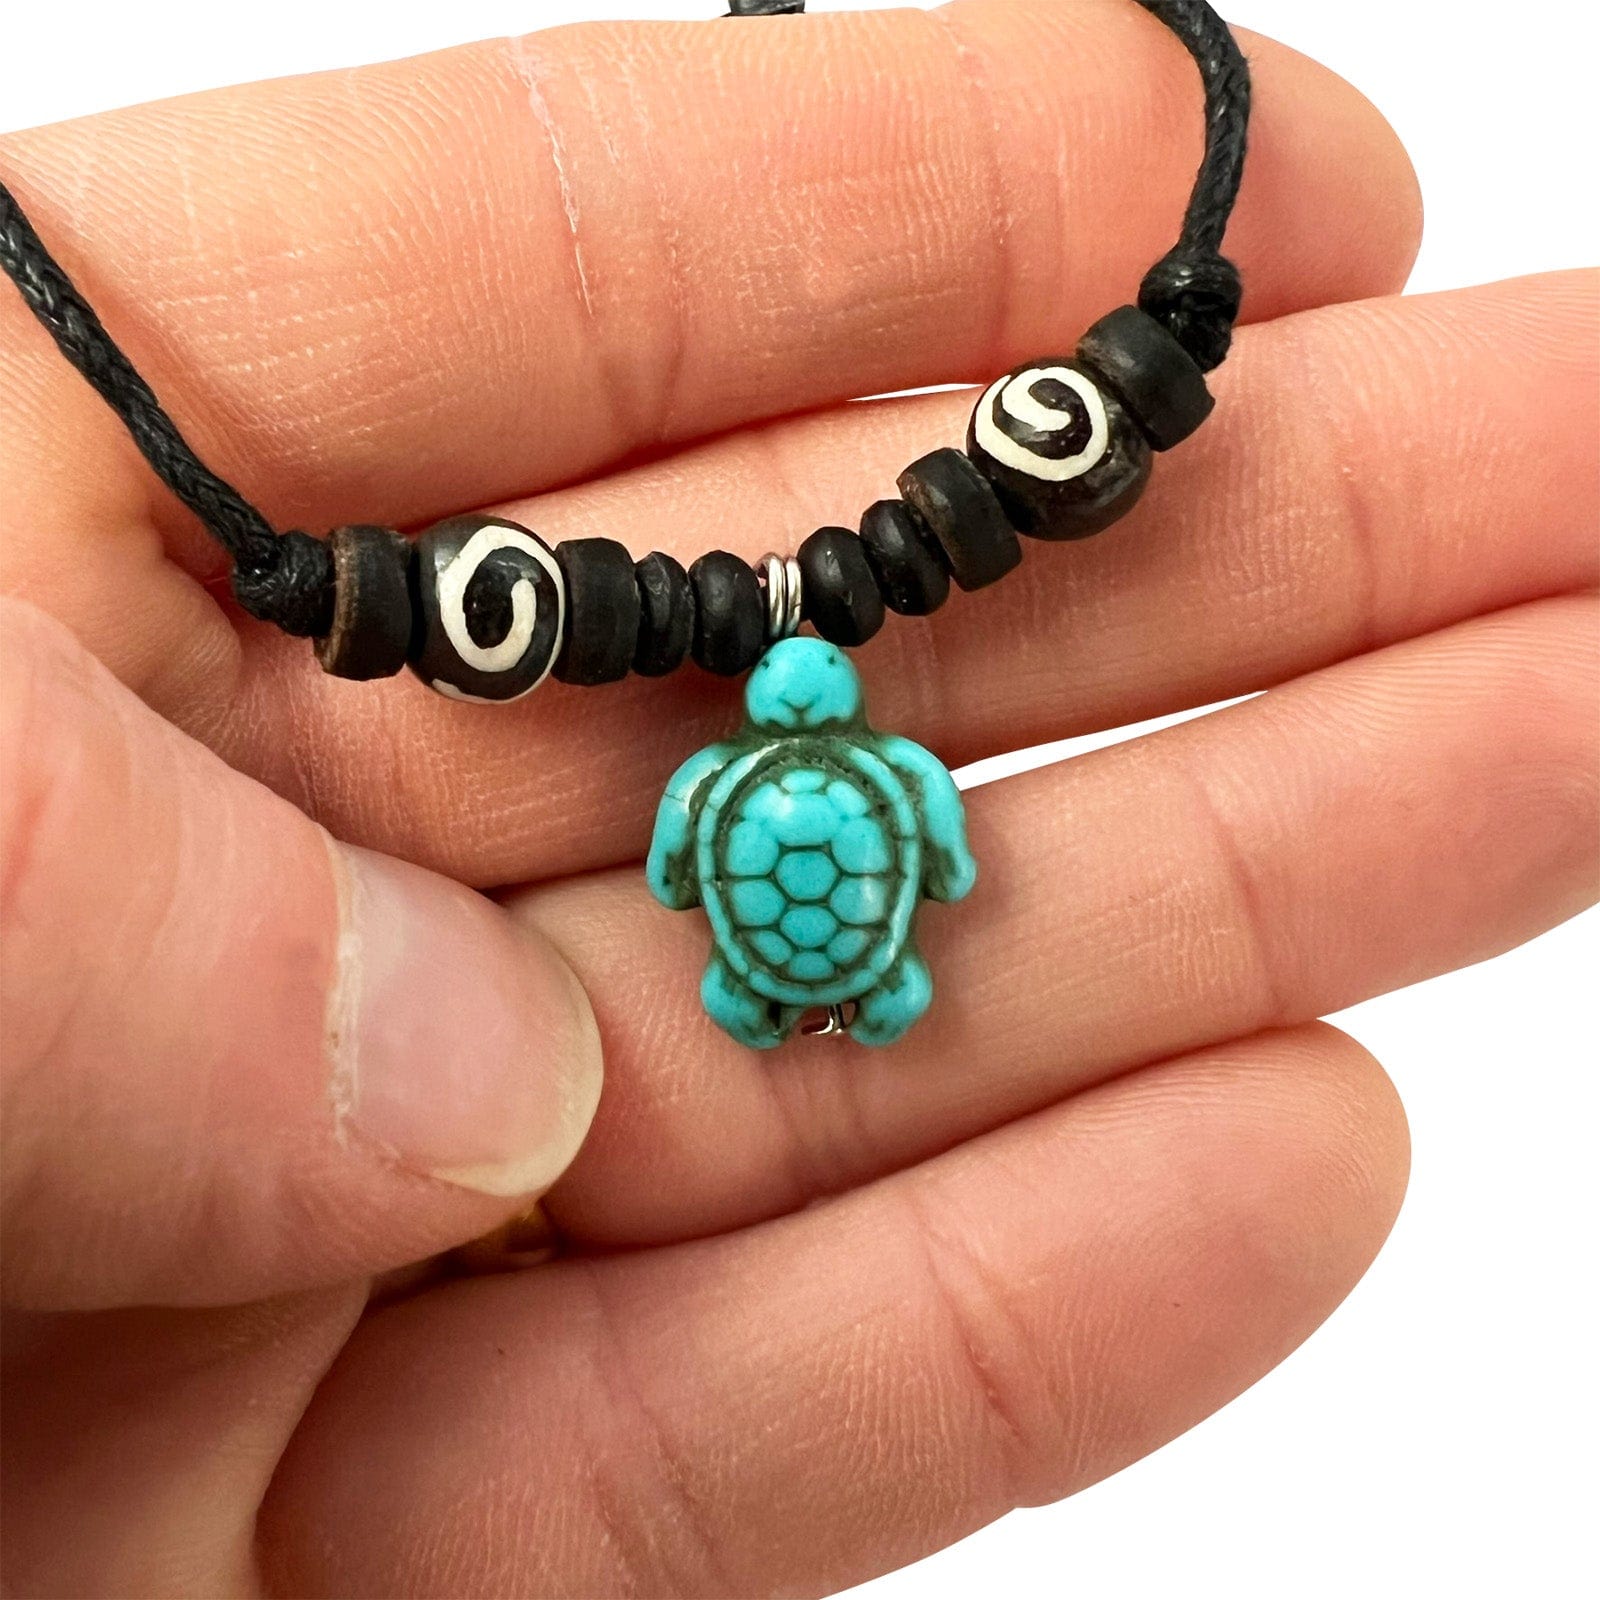 Turquoise Turtle Pendant Beaded Black Cord Chain Necklace Mens Womens Jewellery